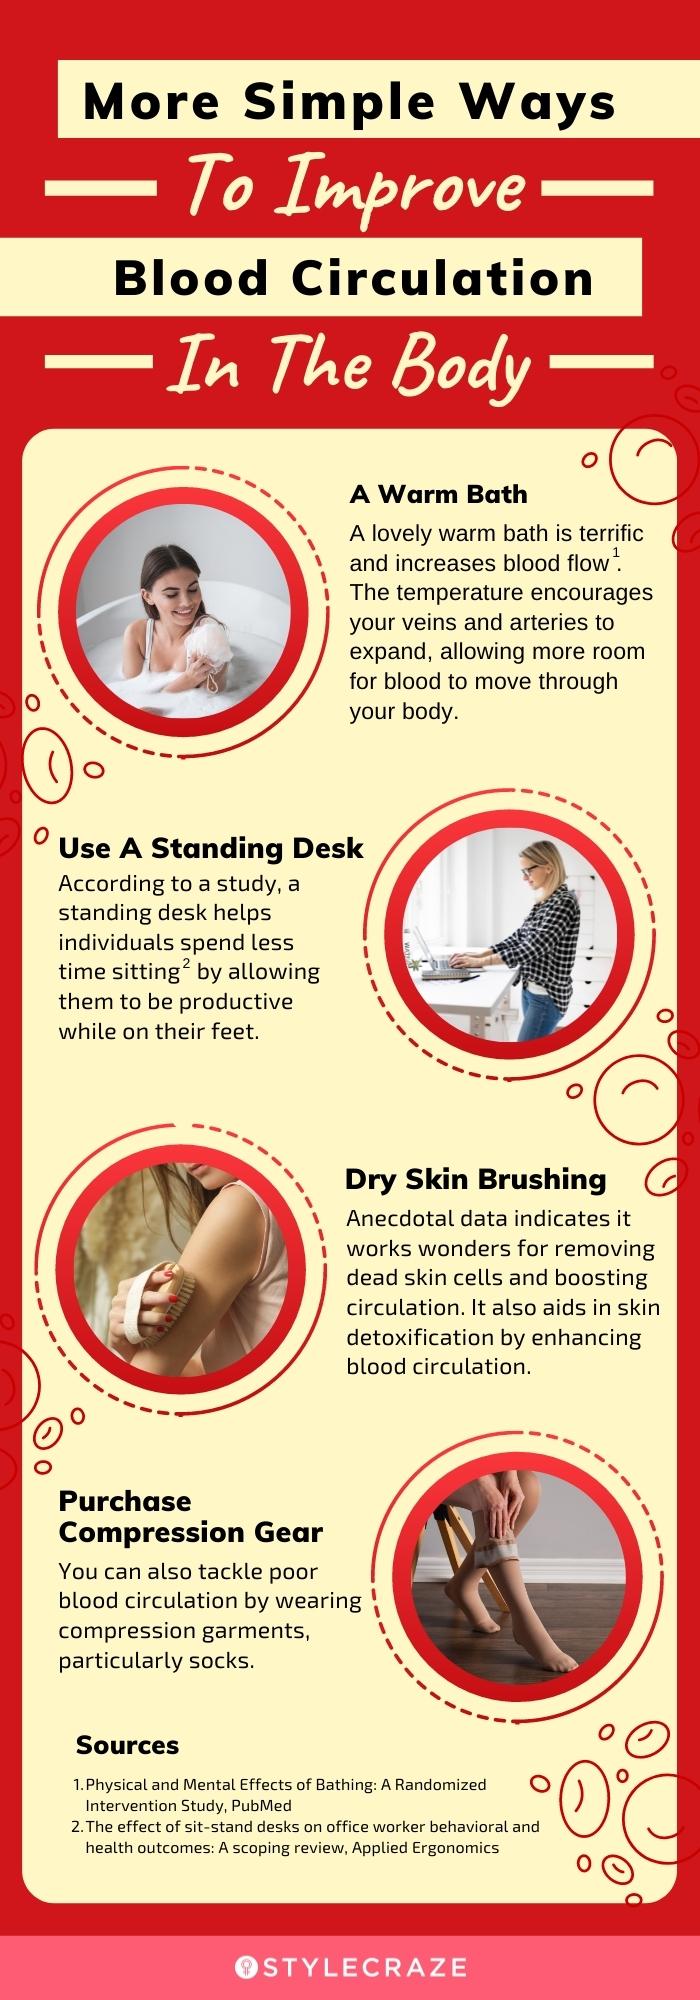 more simple ways to improve blood circulation in the body (infographic)